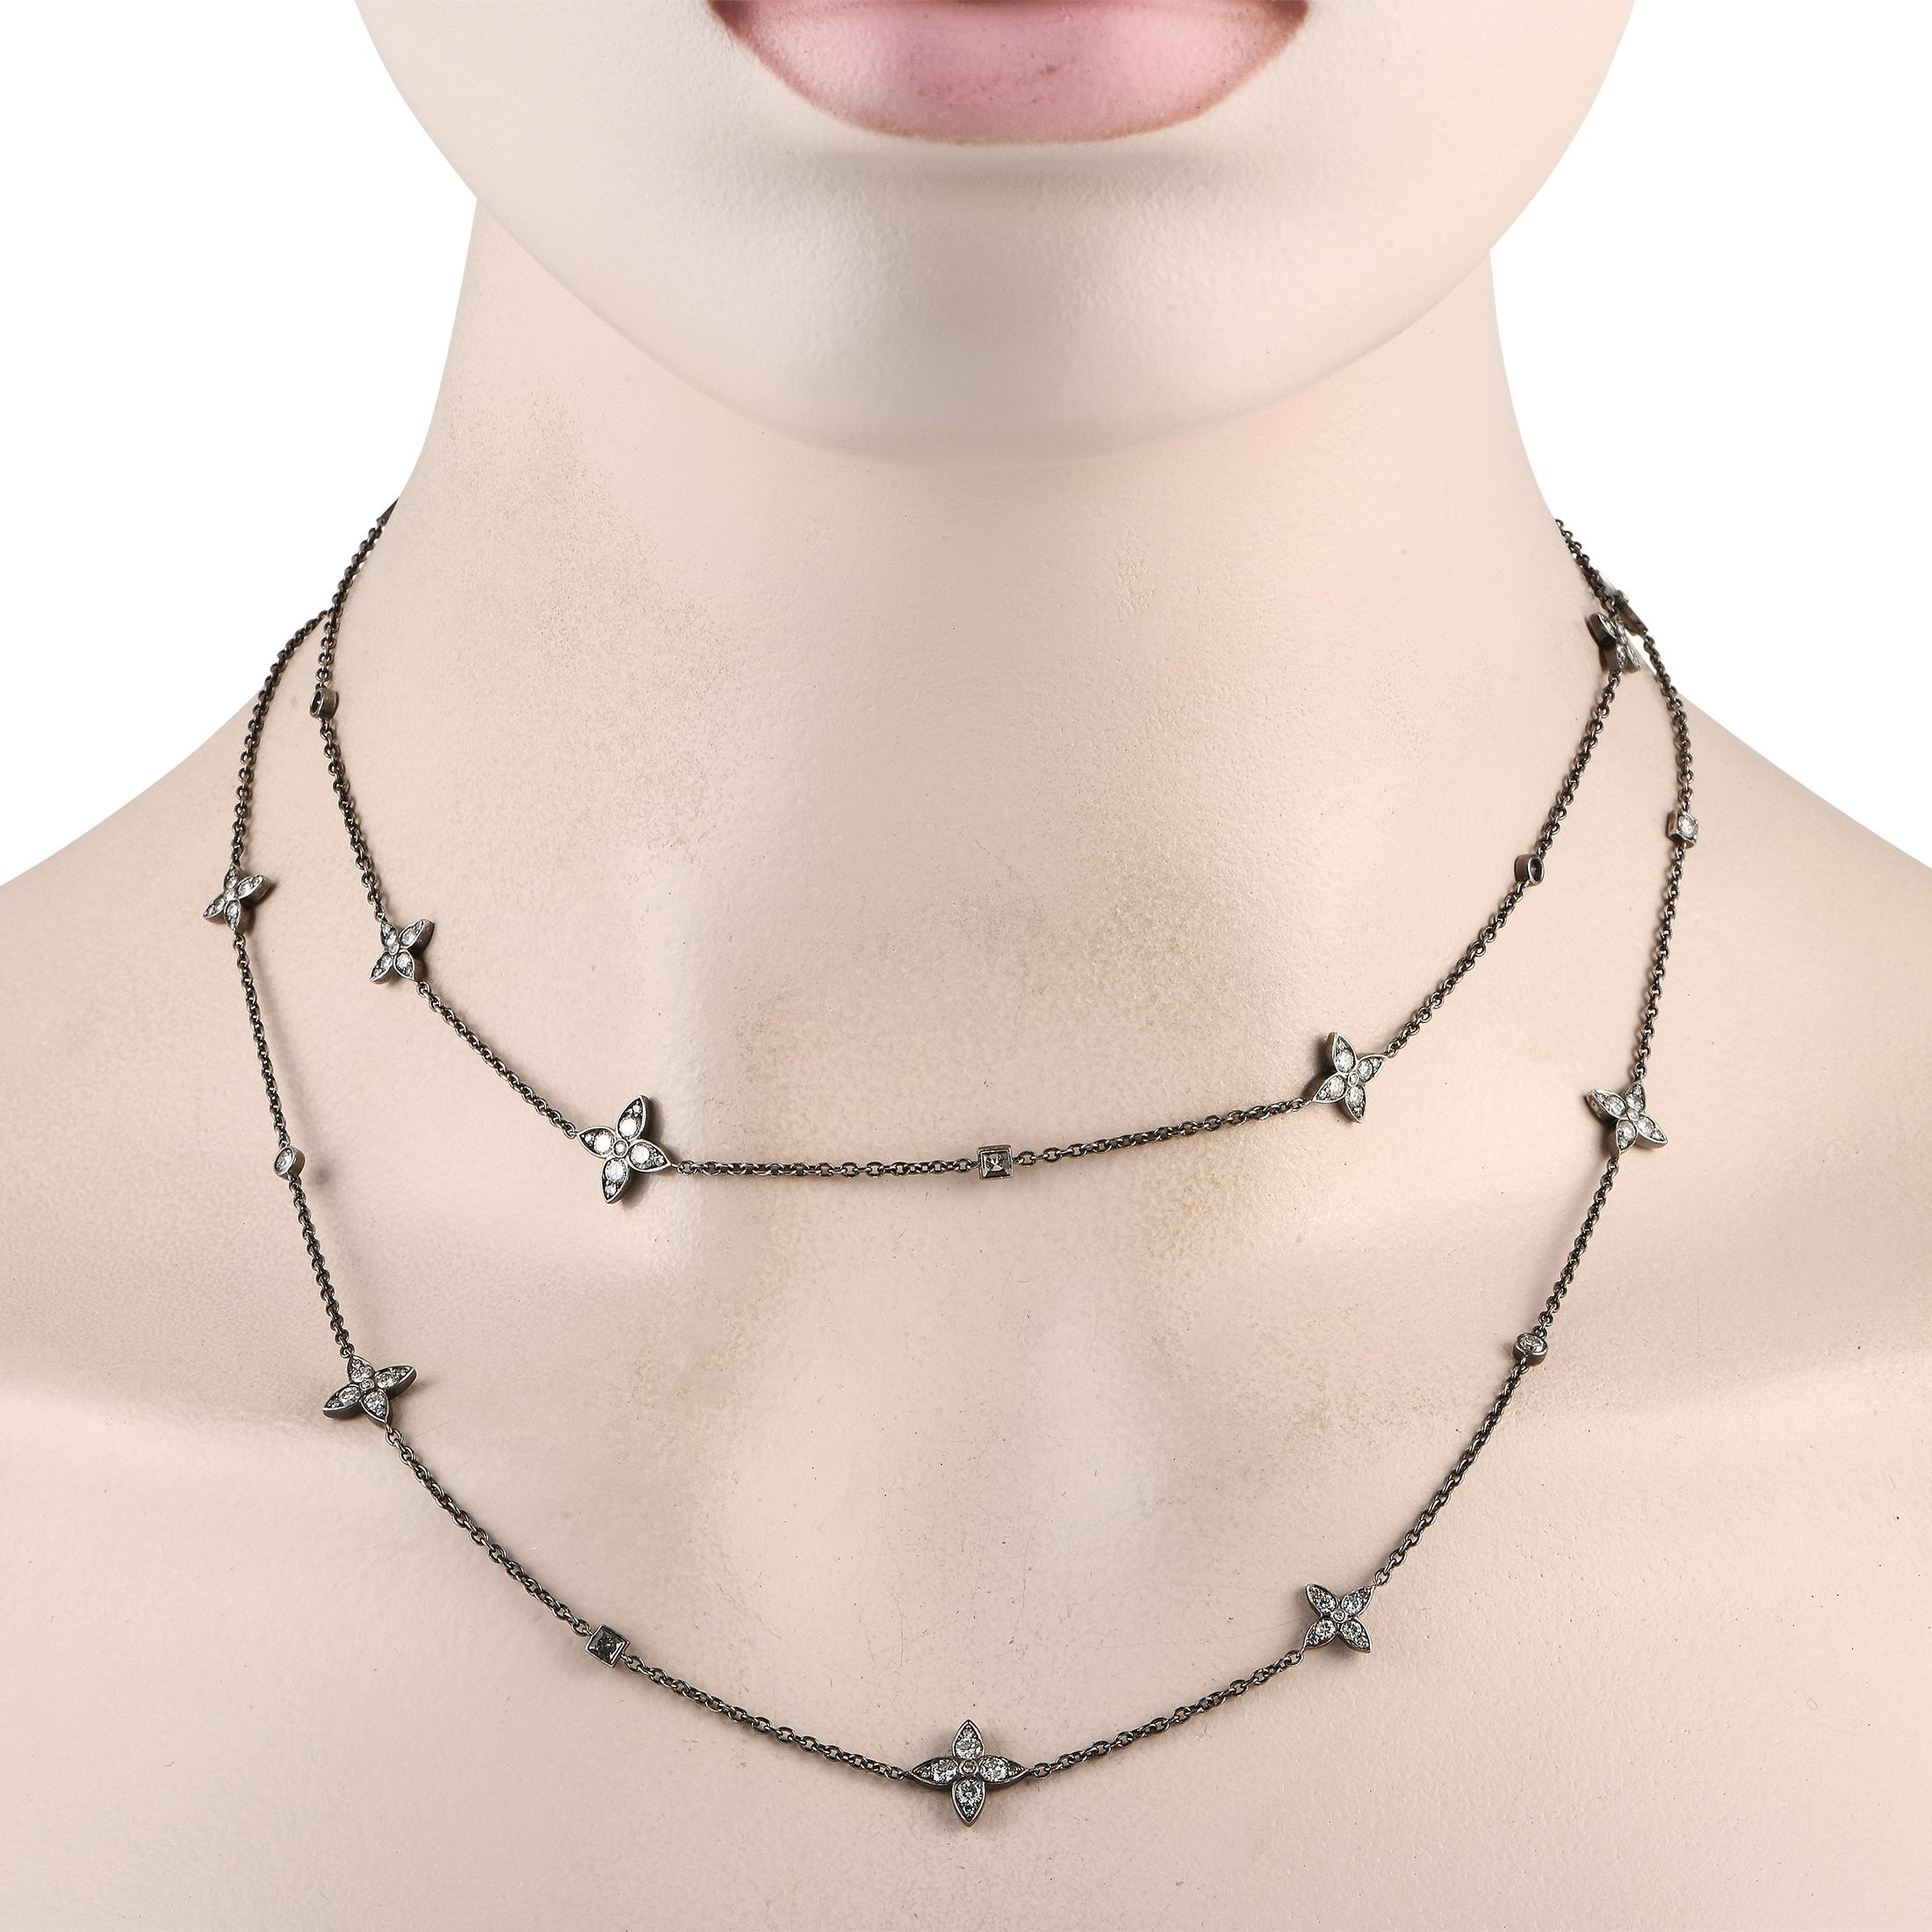 A dark, dramatic 18K White Gold setting measuring 36” long makes this unique necklace a piece that will continually capture your imagination. Stylish and understated all at once, it comes complete with sparkling diamonds totaling 2.75 carats. 
